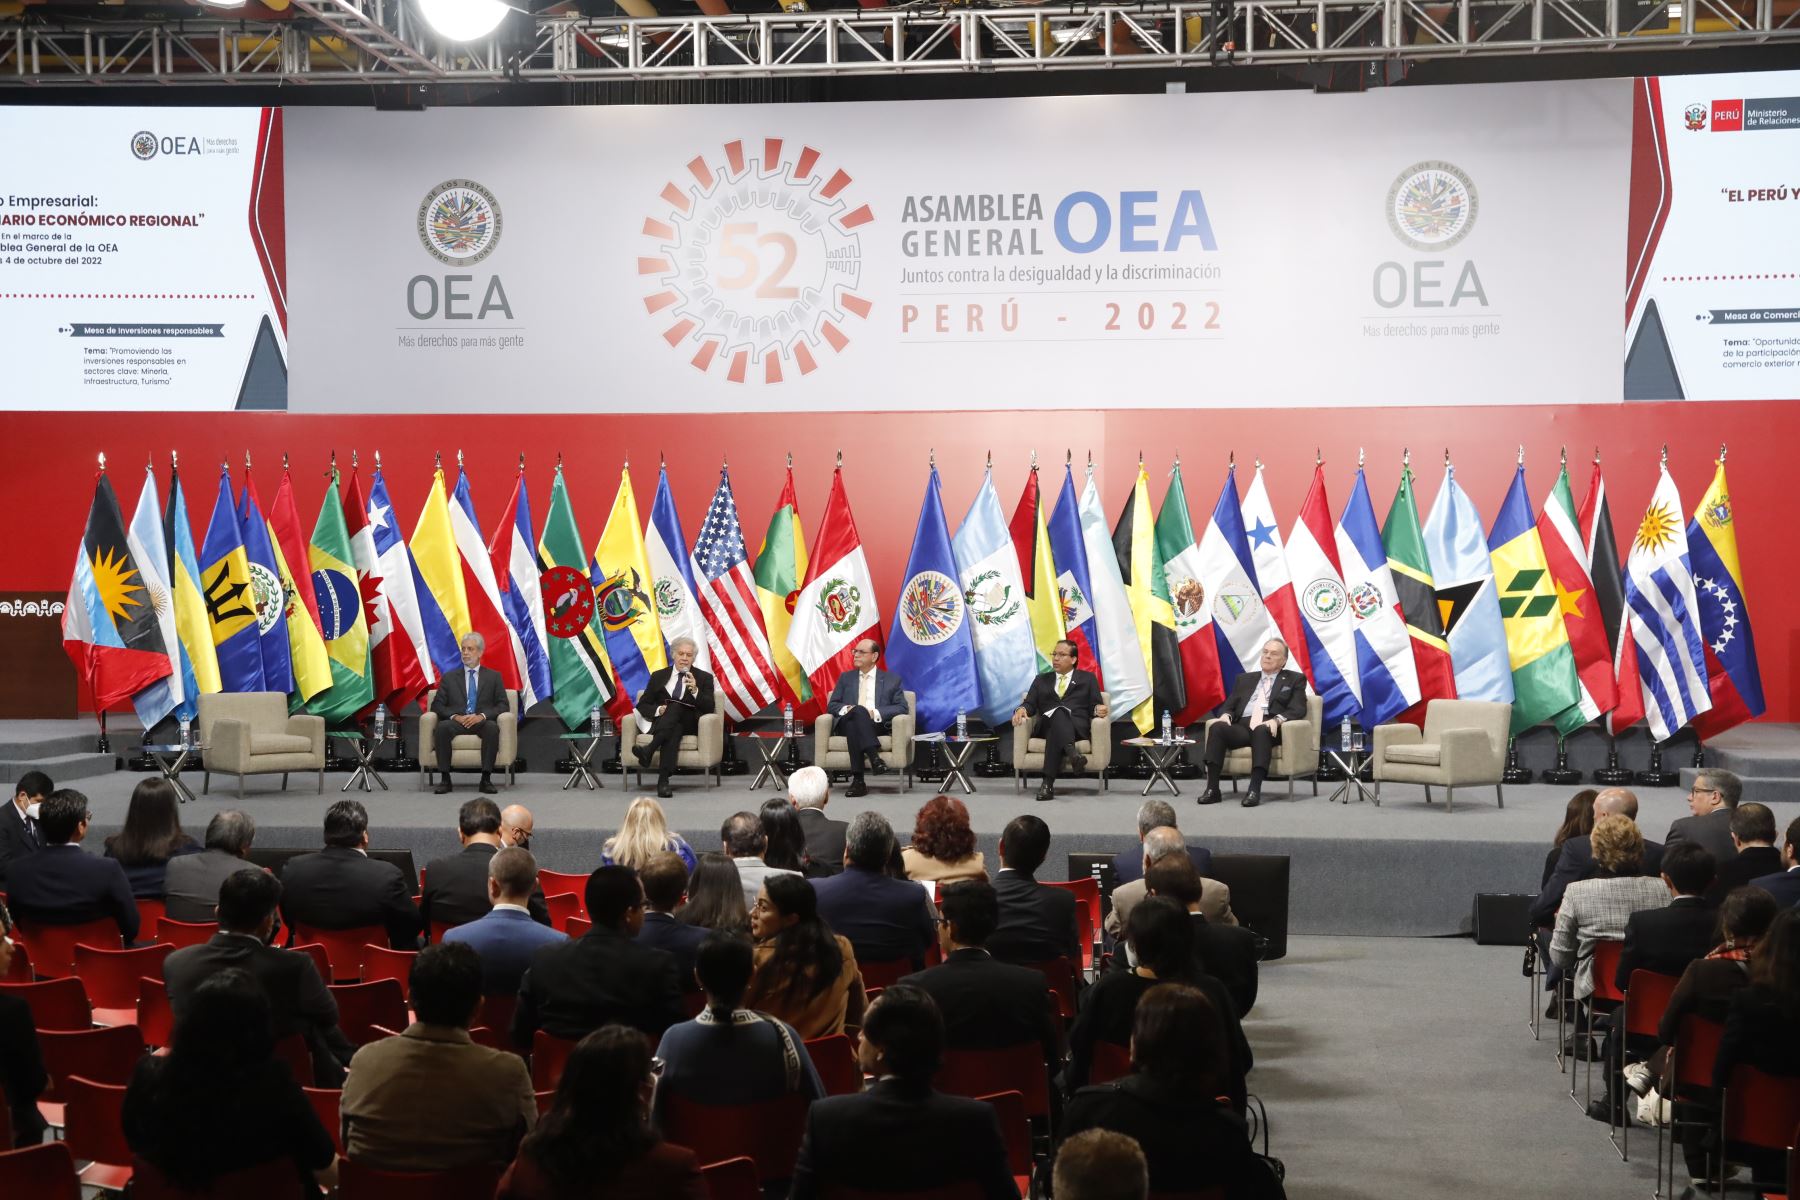 Peru as the venue for the 52nd OAS General Assembly will boost the country's image and meeting tourism will be strengthened.